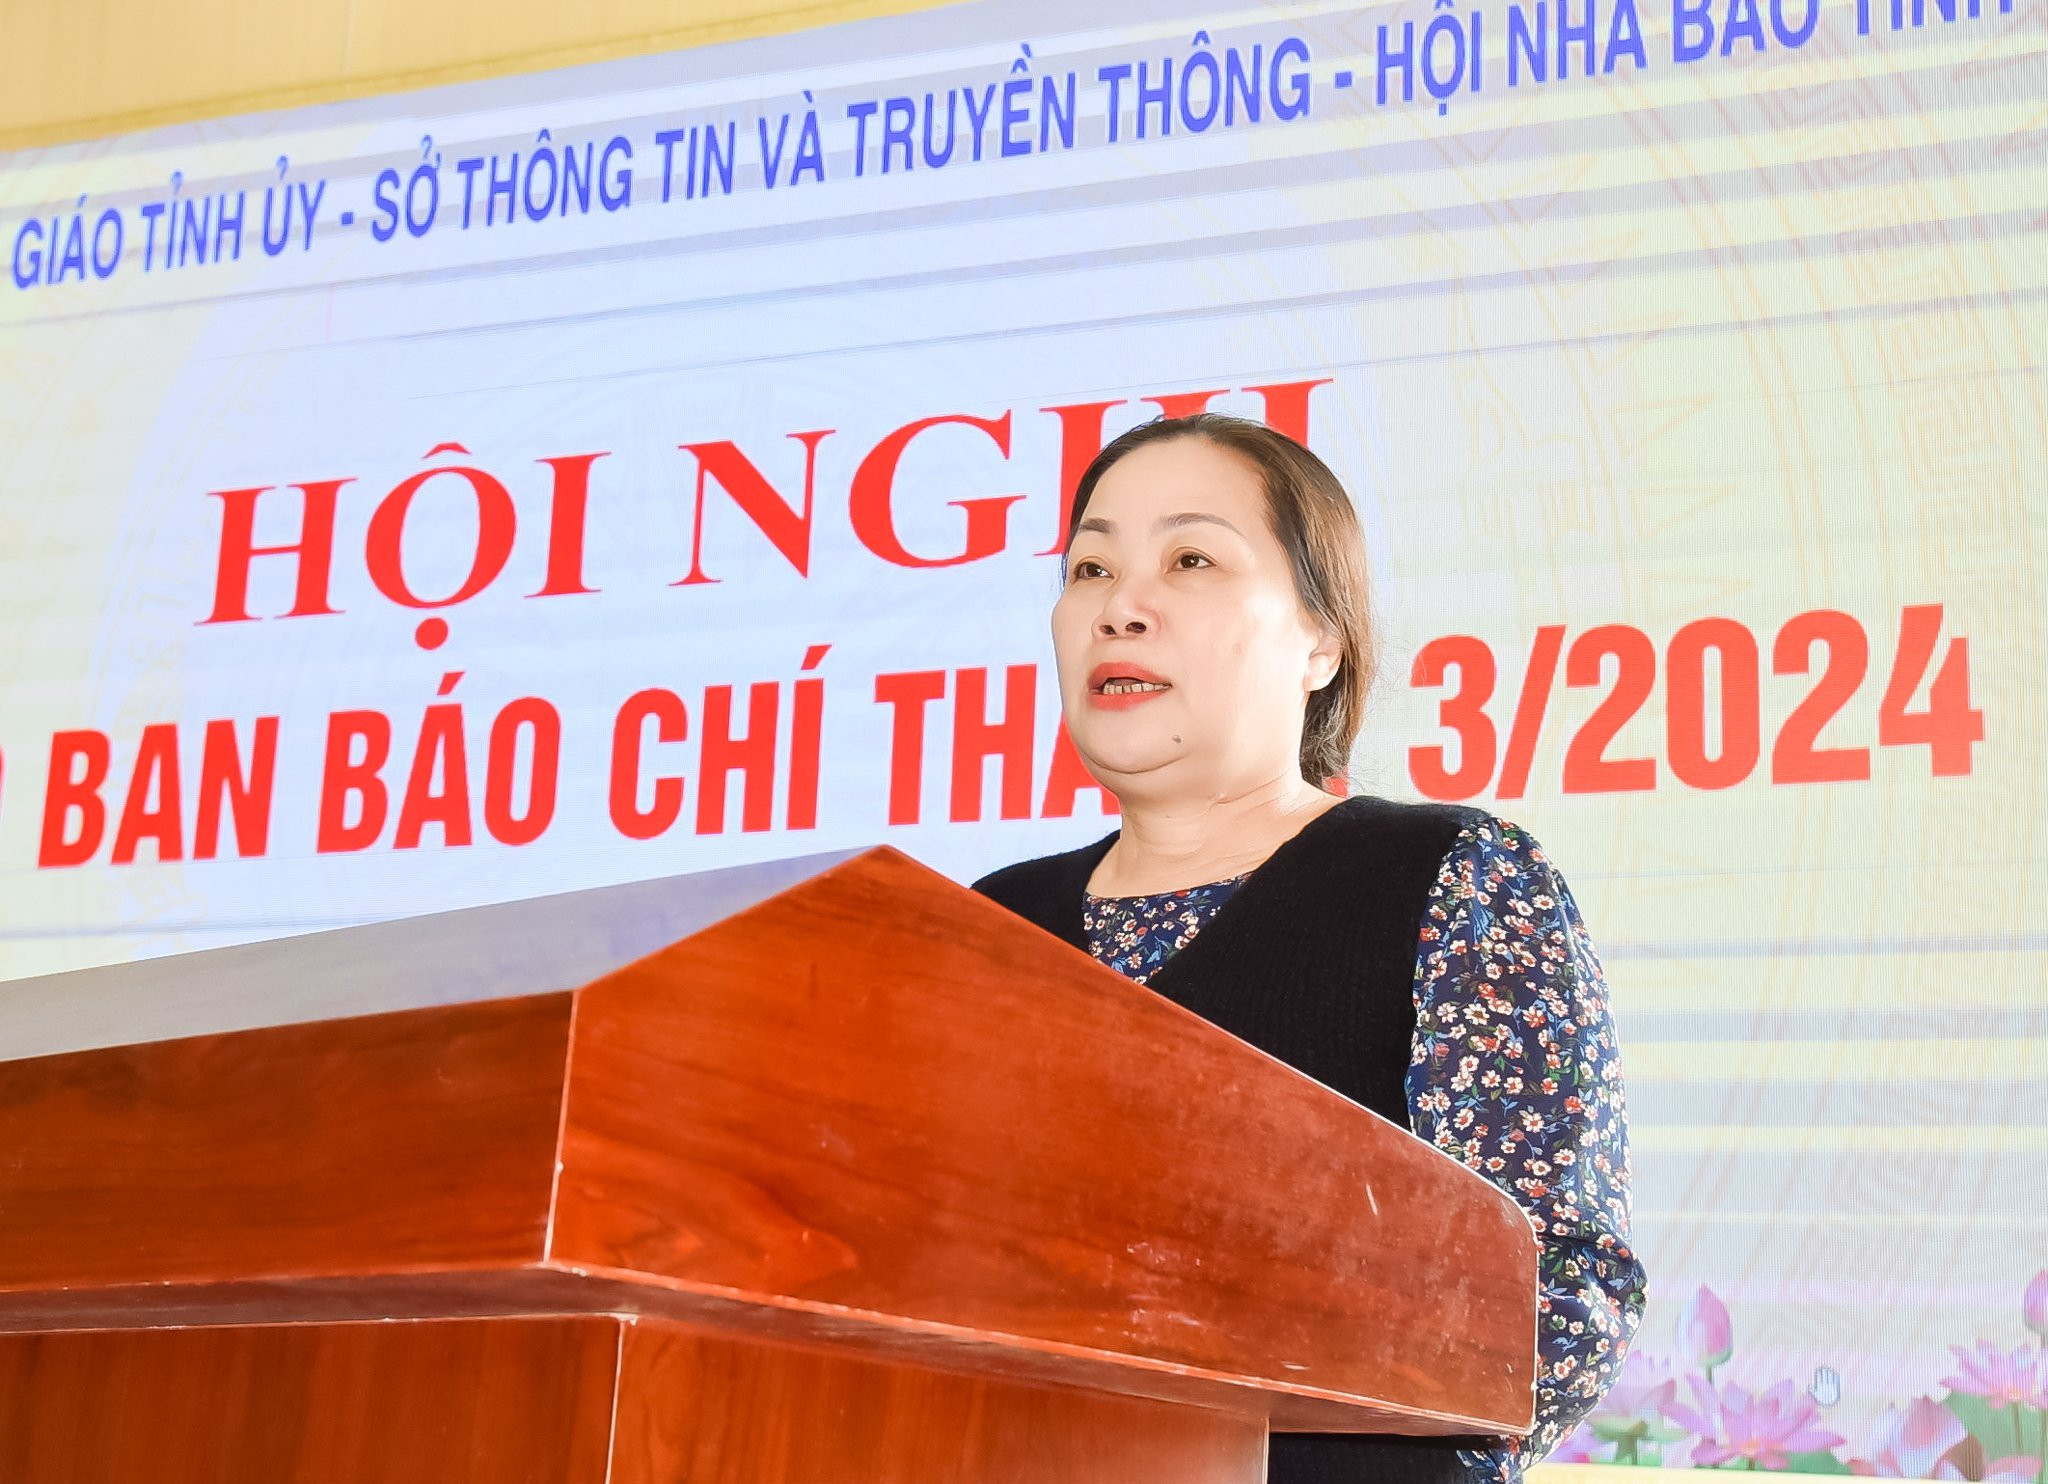 bna-chi-huong-anh-thanh-le-4013.jpg